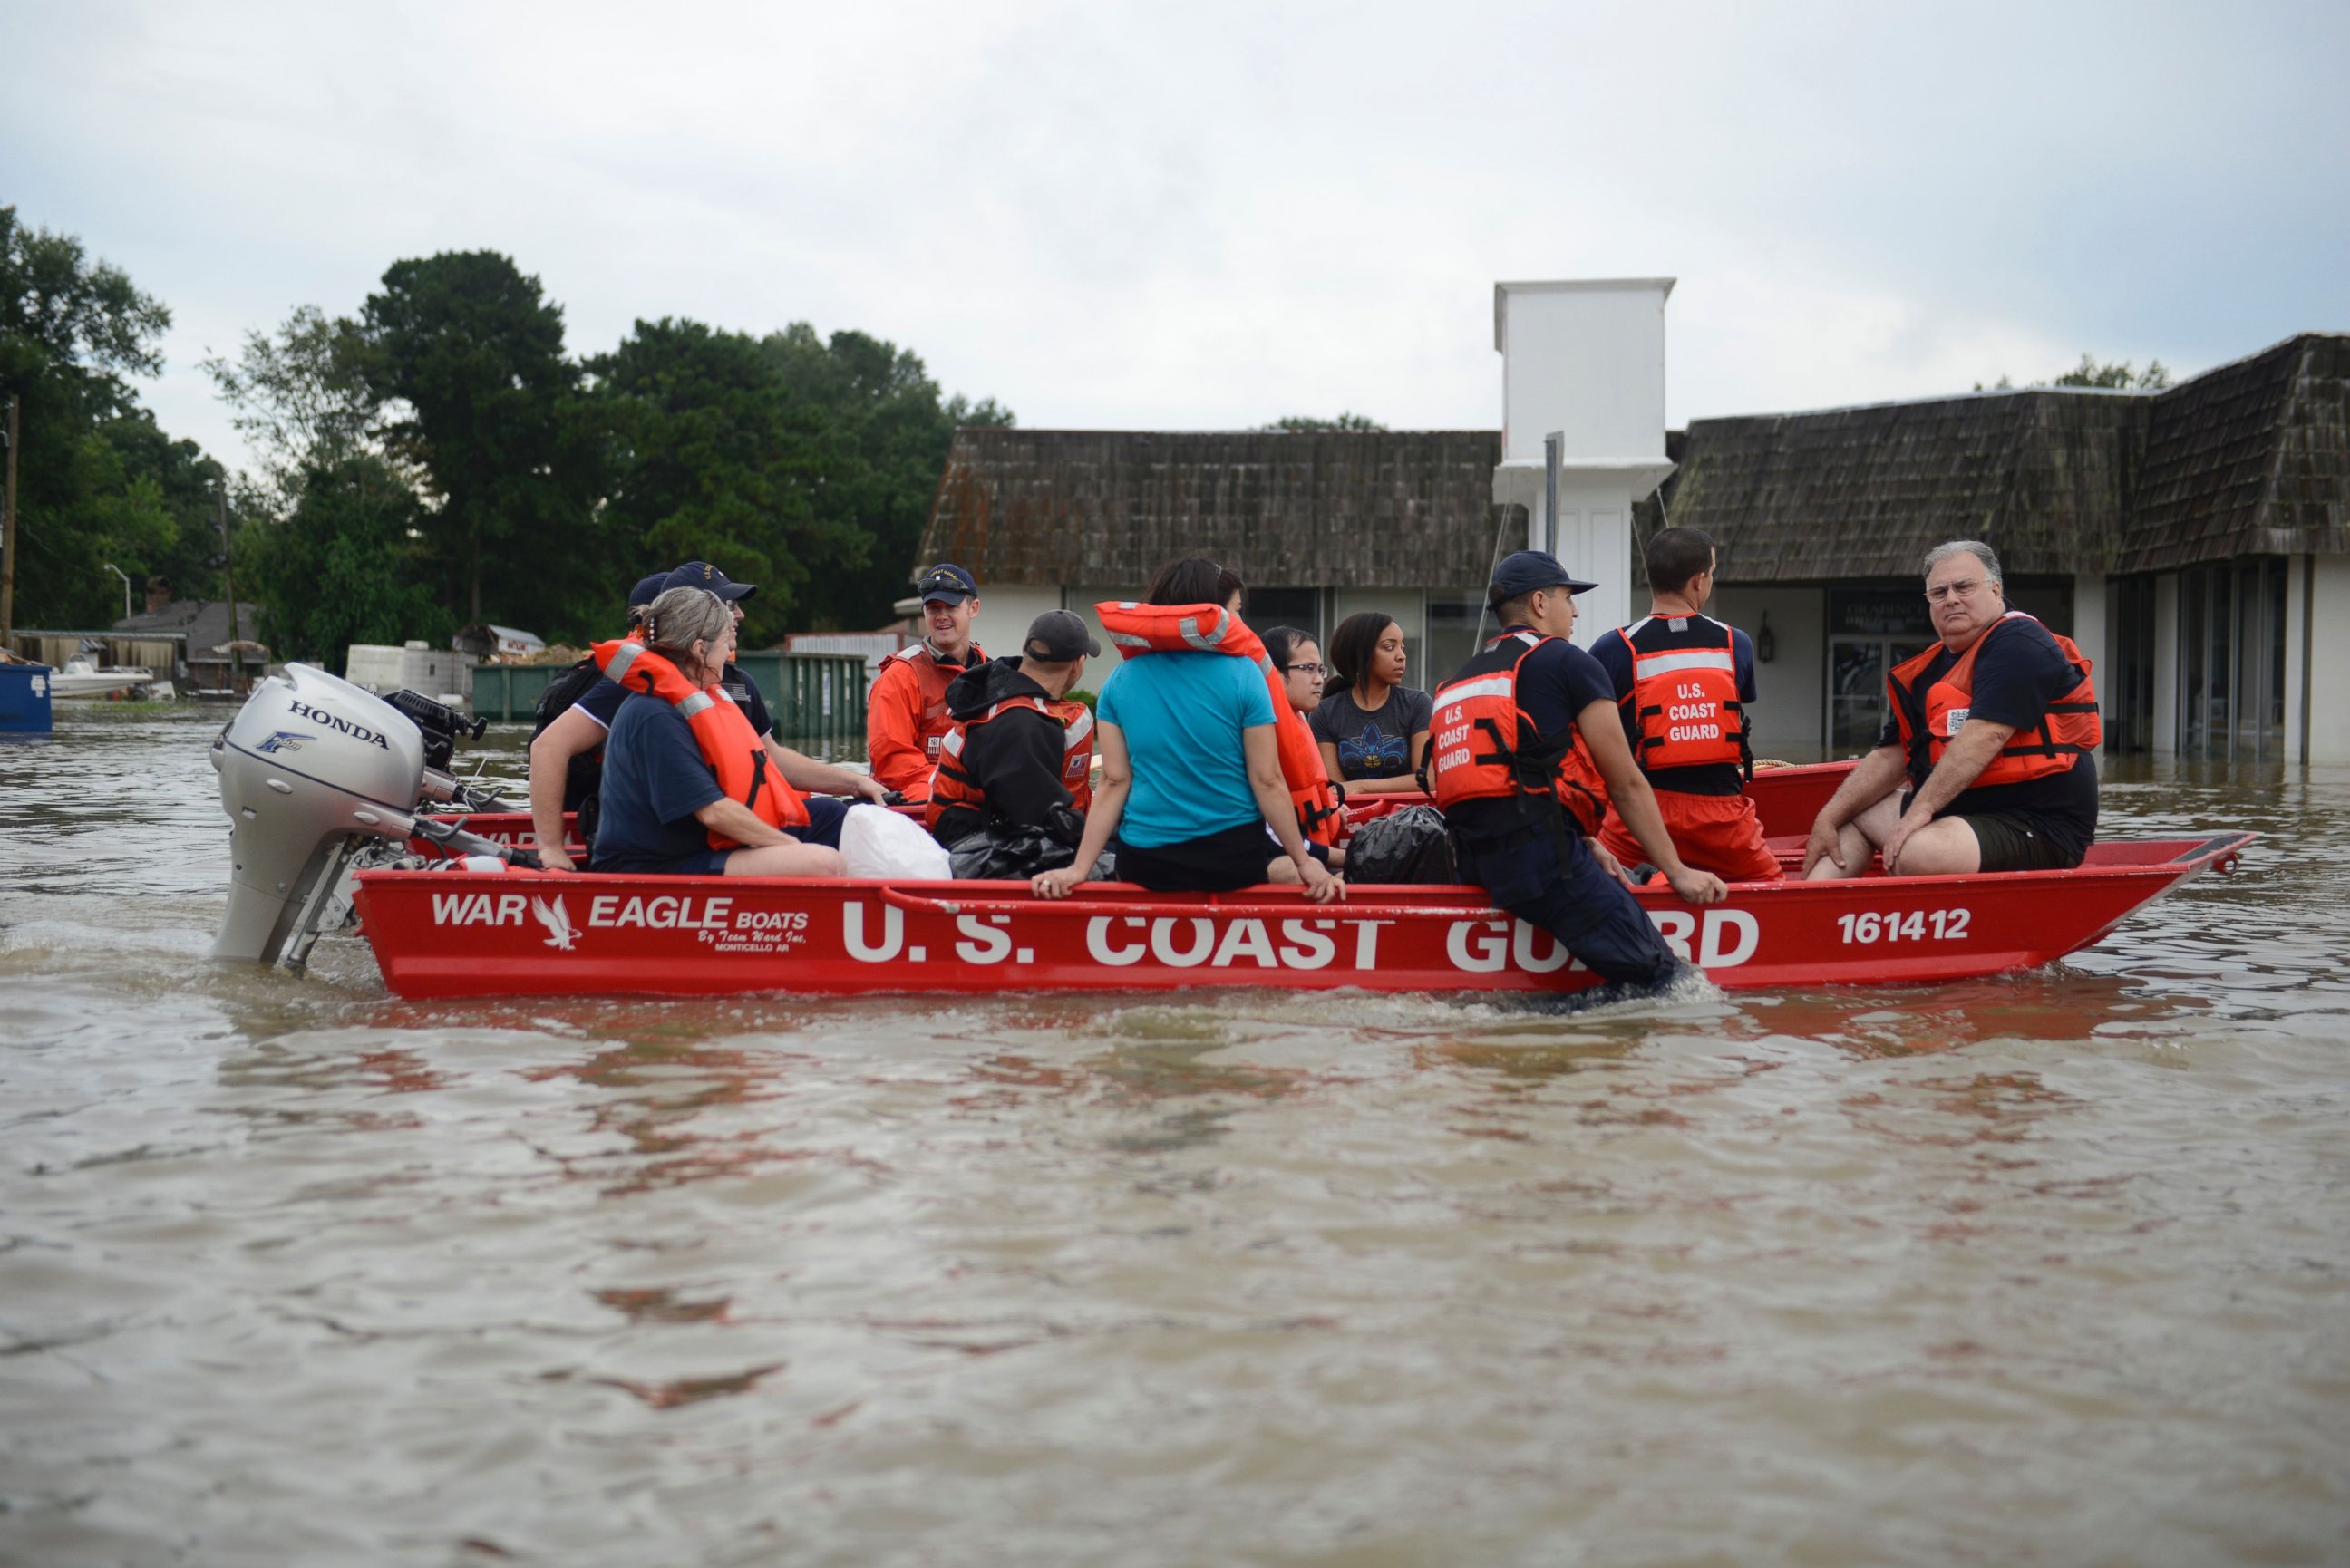 PHOTO: Coast Guard personnel evacuating people from a floodwaters in Baton Rouge, Louisiana, Aug. 14, 2016.  